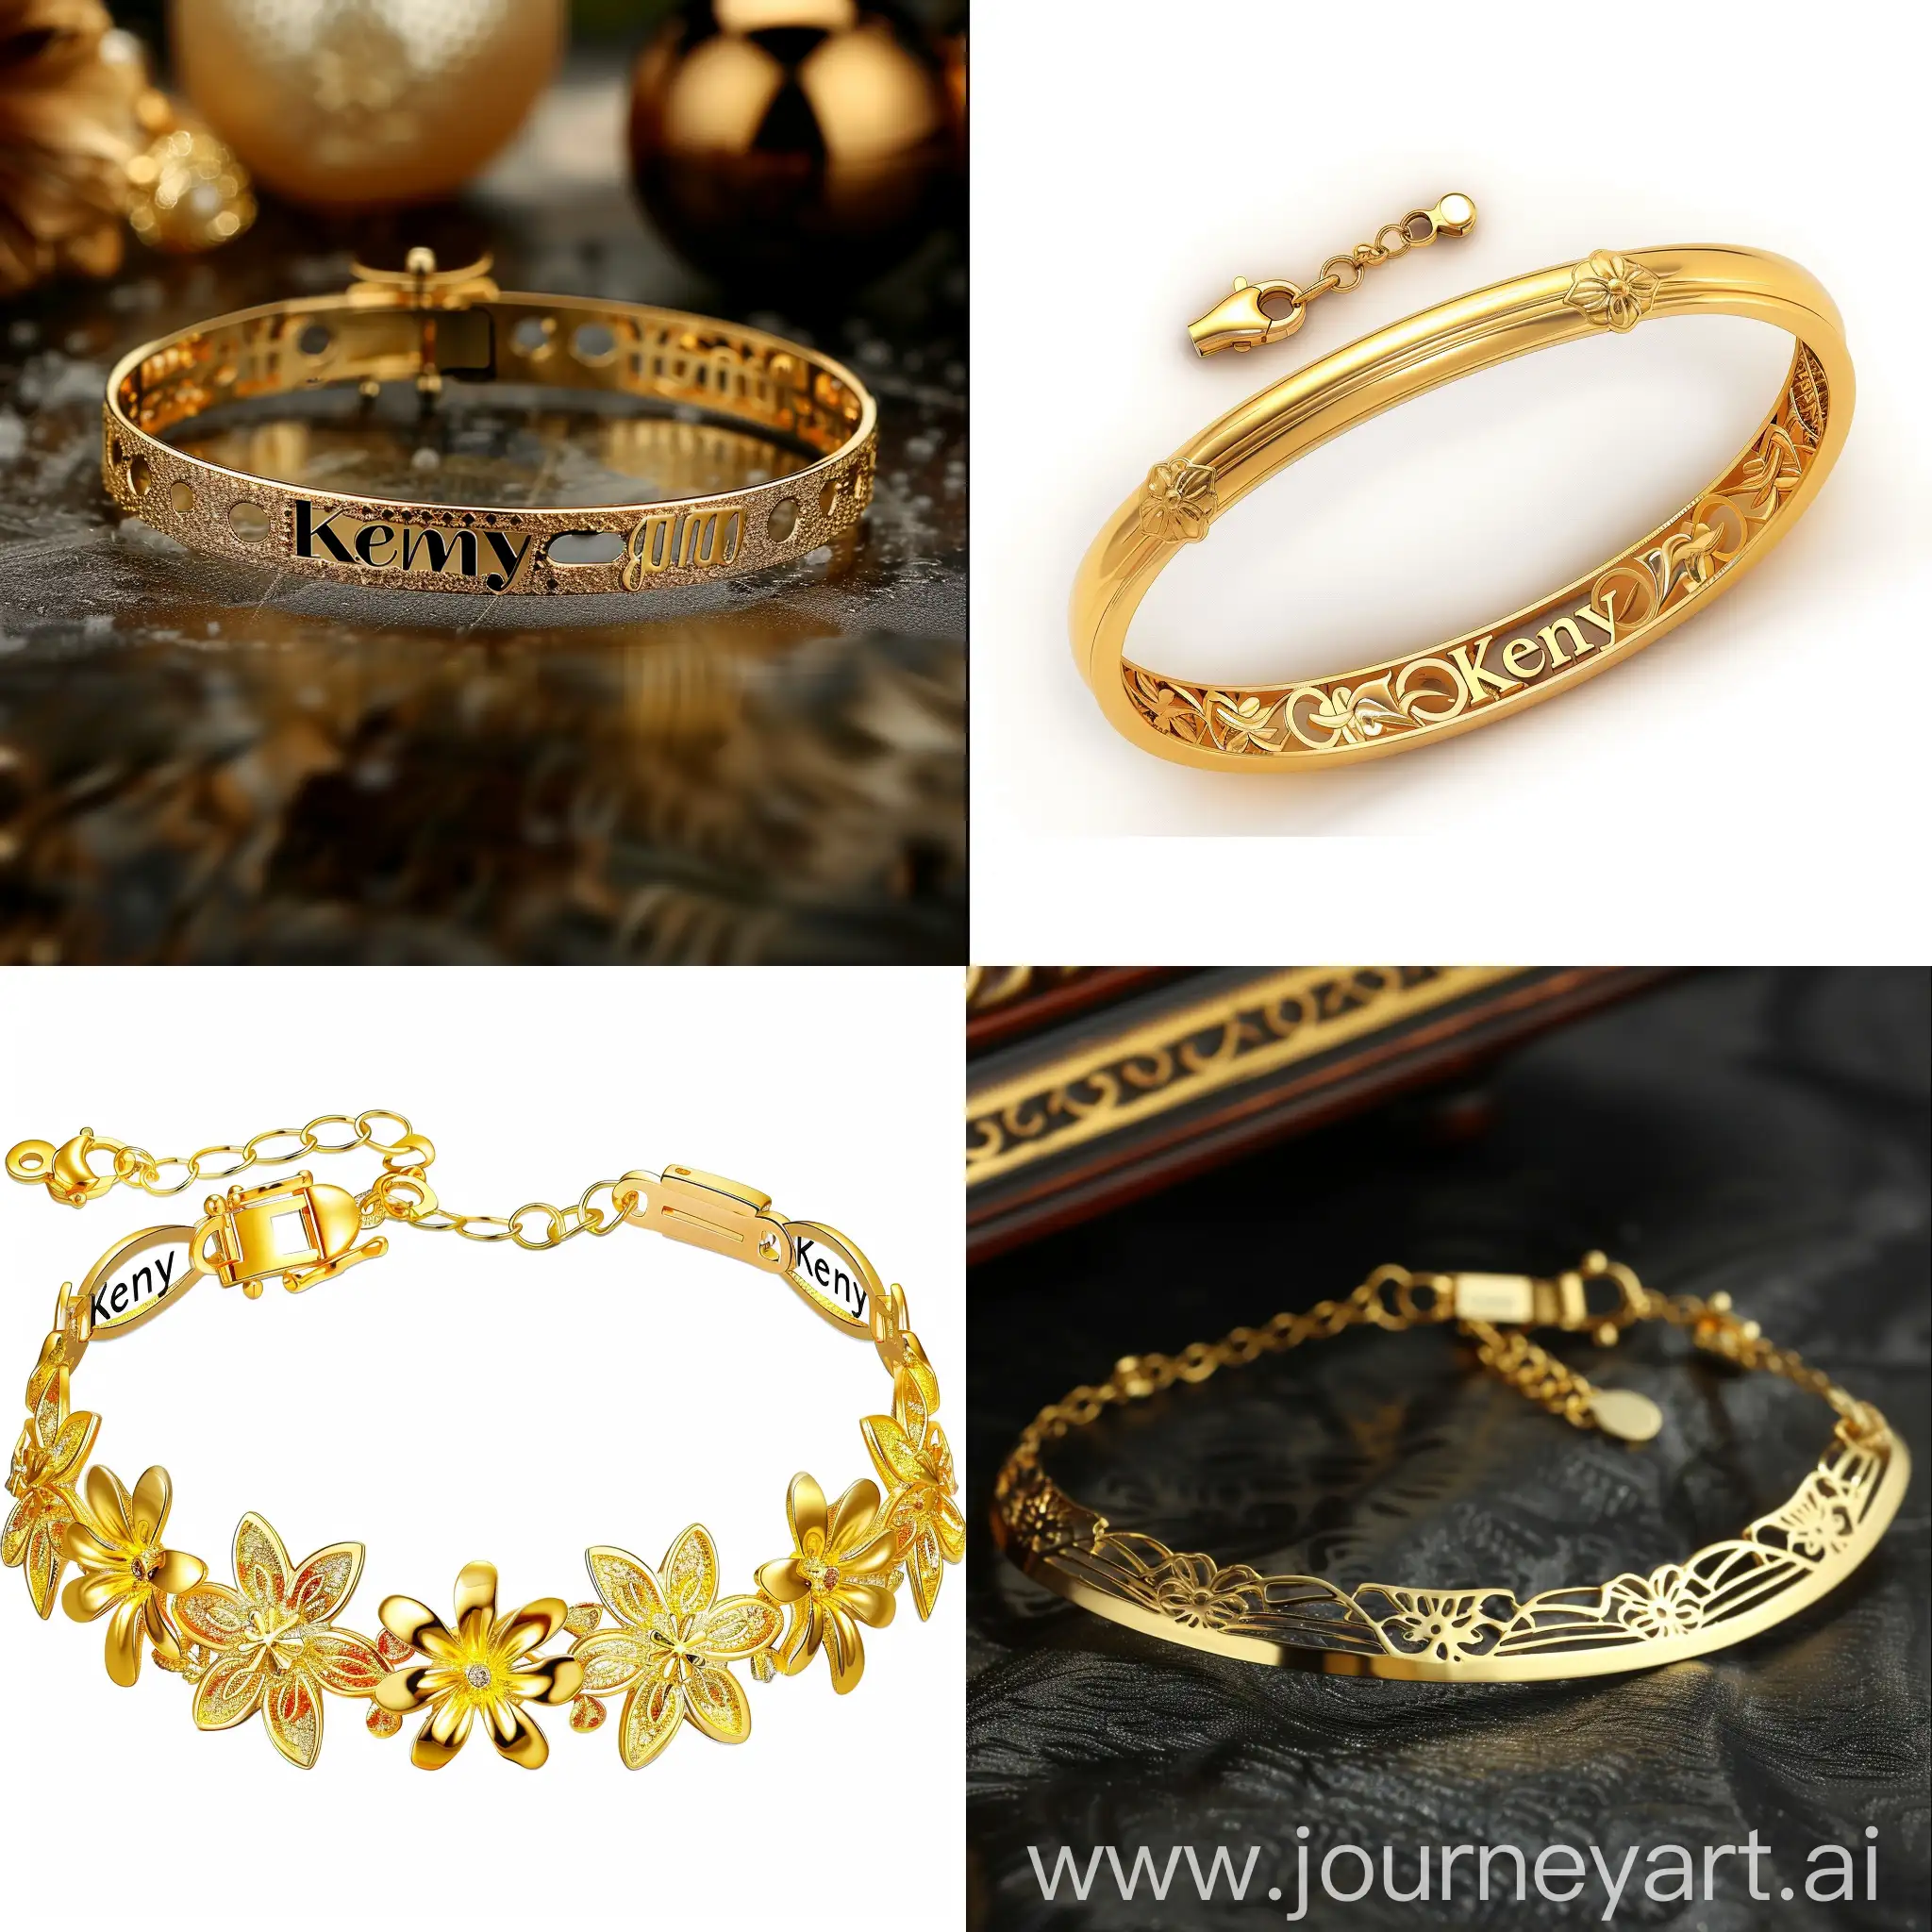 A golden bracelet with name of “Kemy”